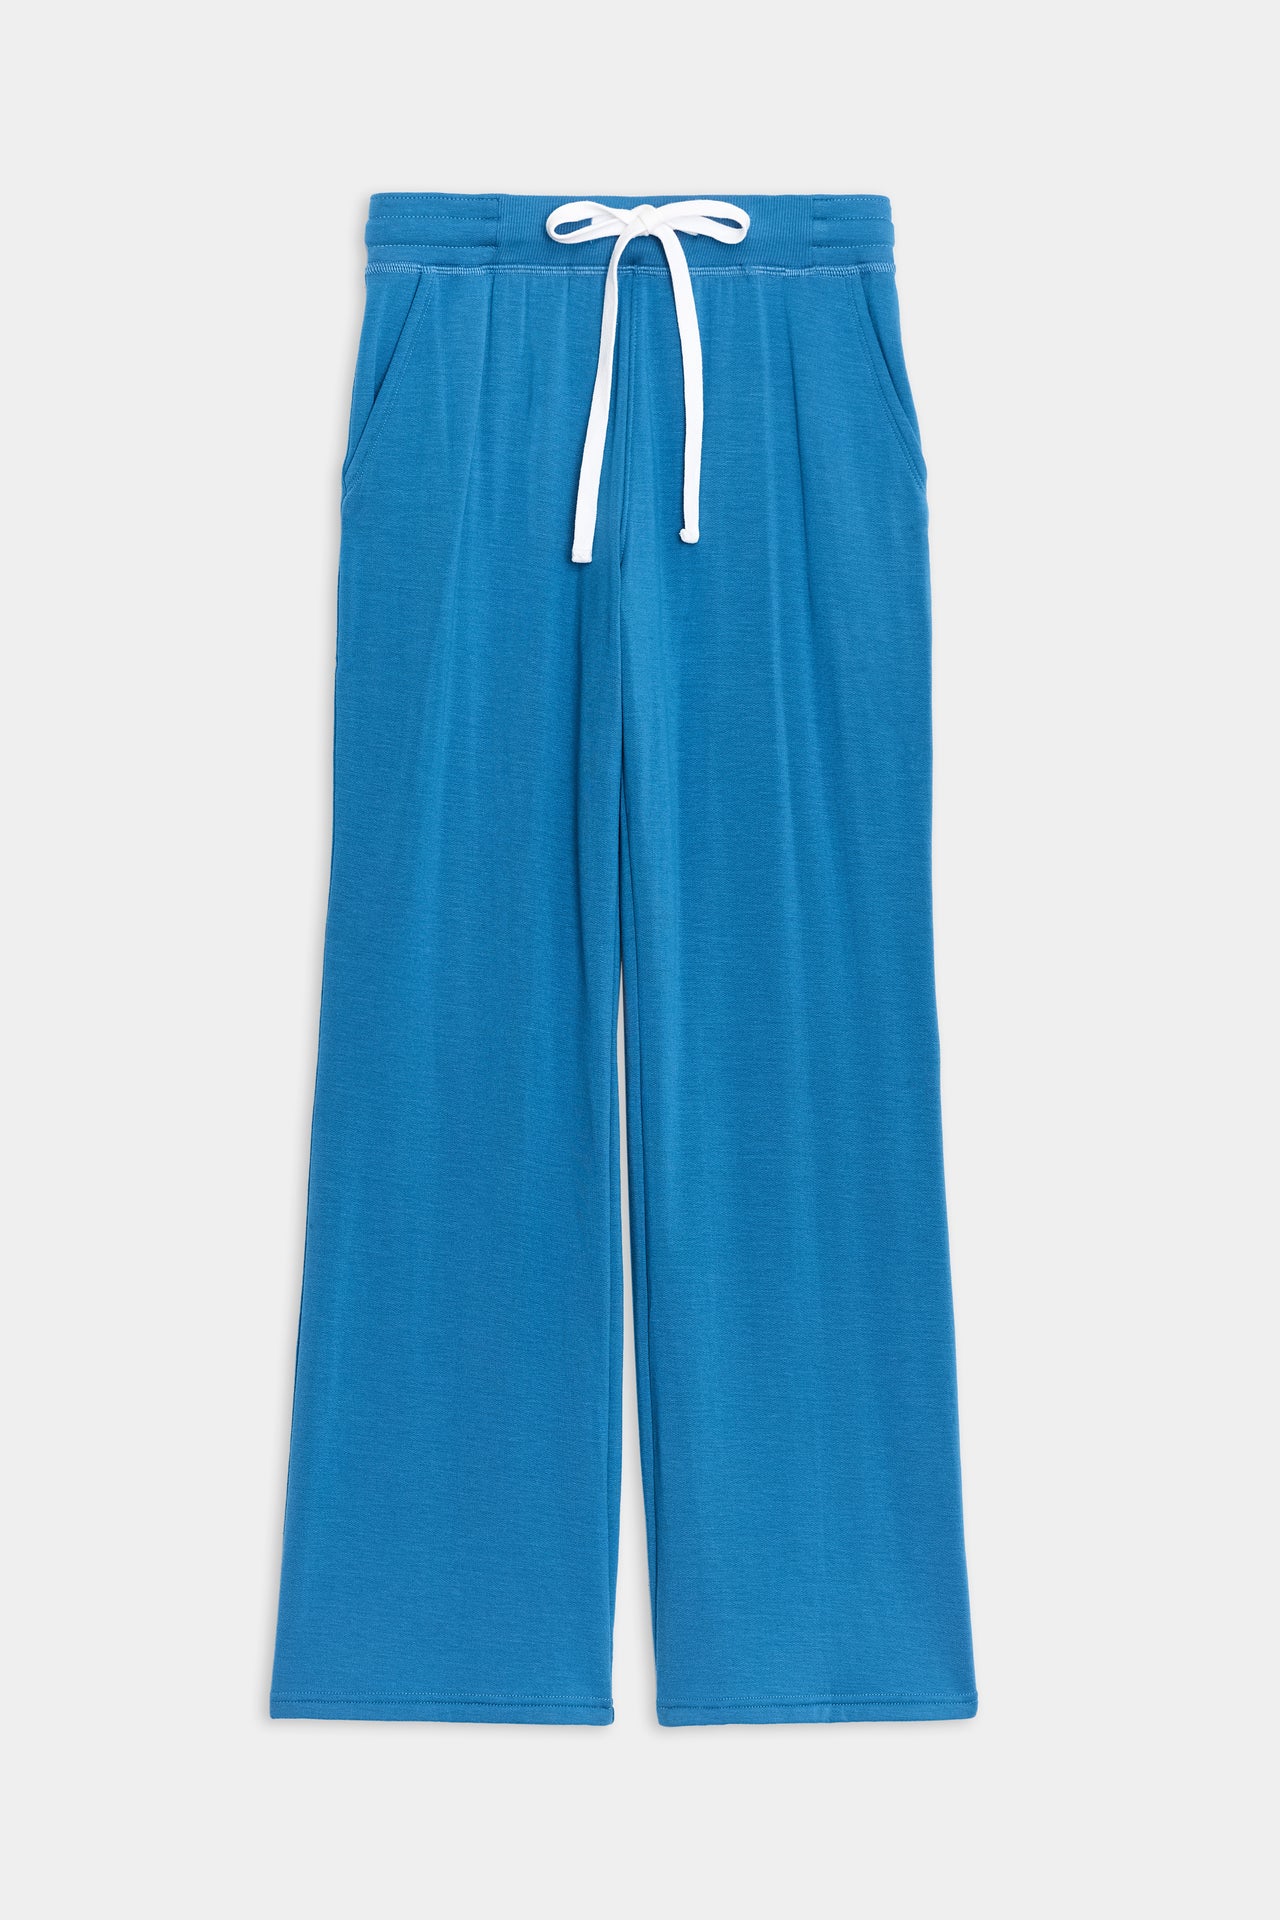 Front flat view of bright blue high rise wide leg relaxed fit sweatpant with side pockets and white drawstring.